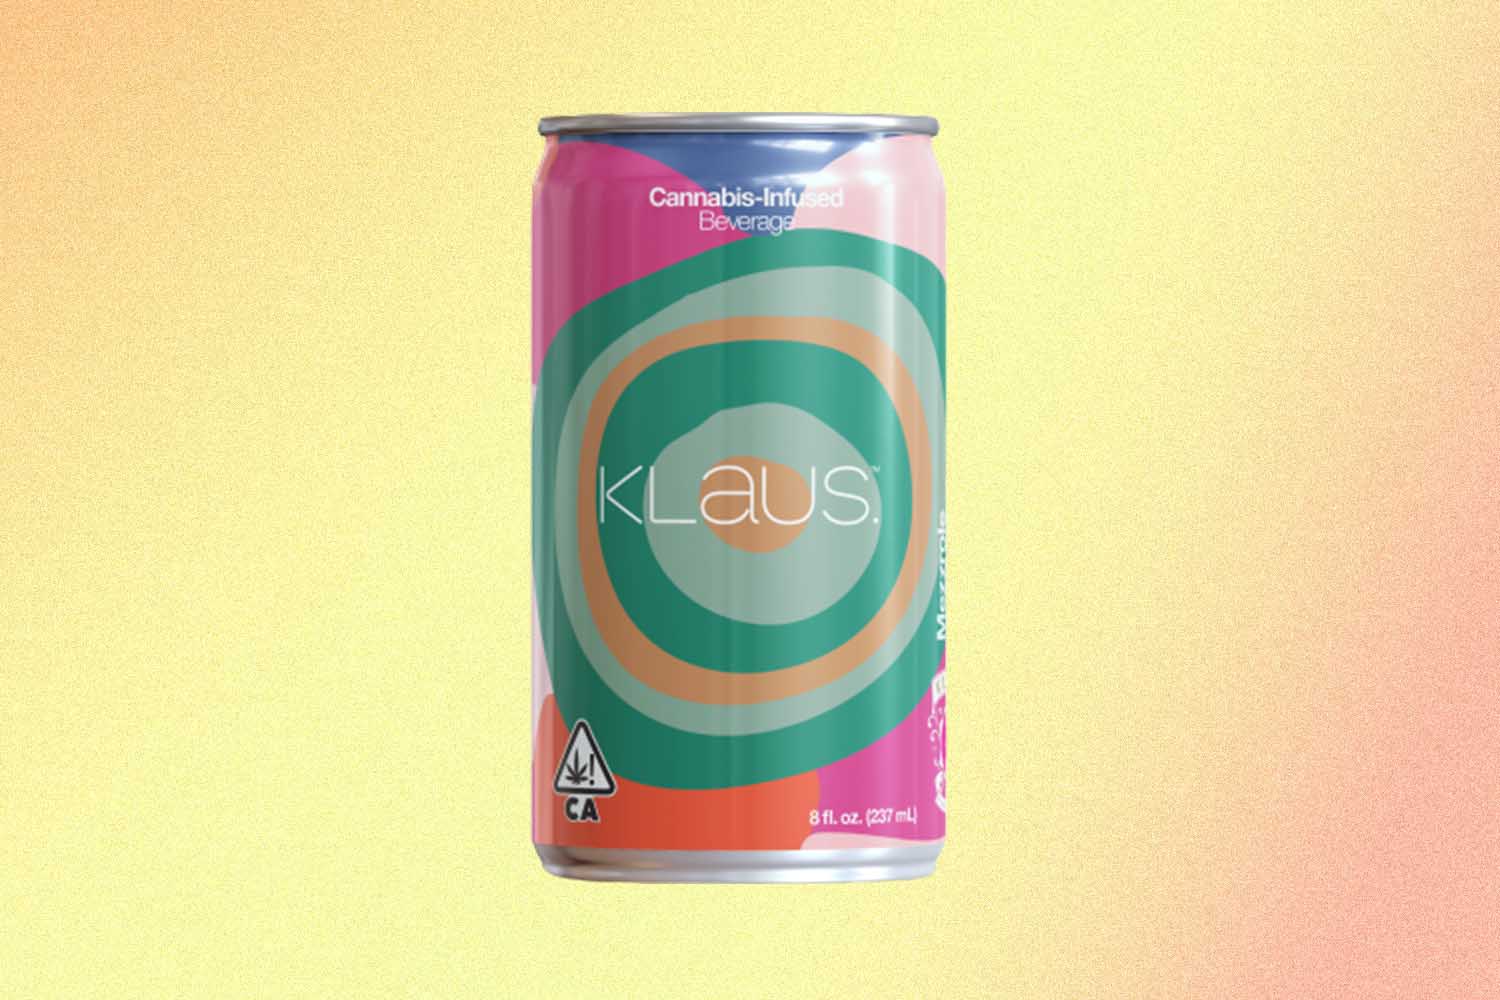 The first release from Klaus, a THC-infused canned cocktail with no booze